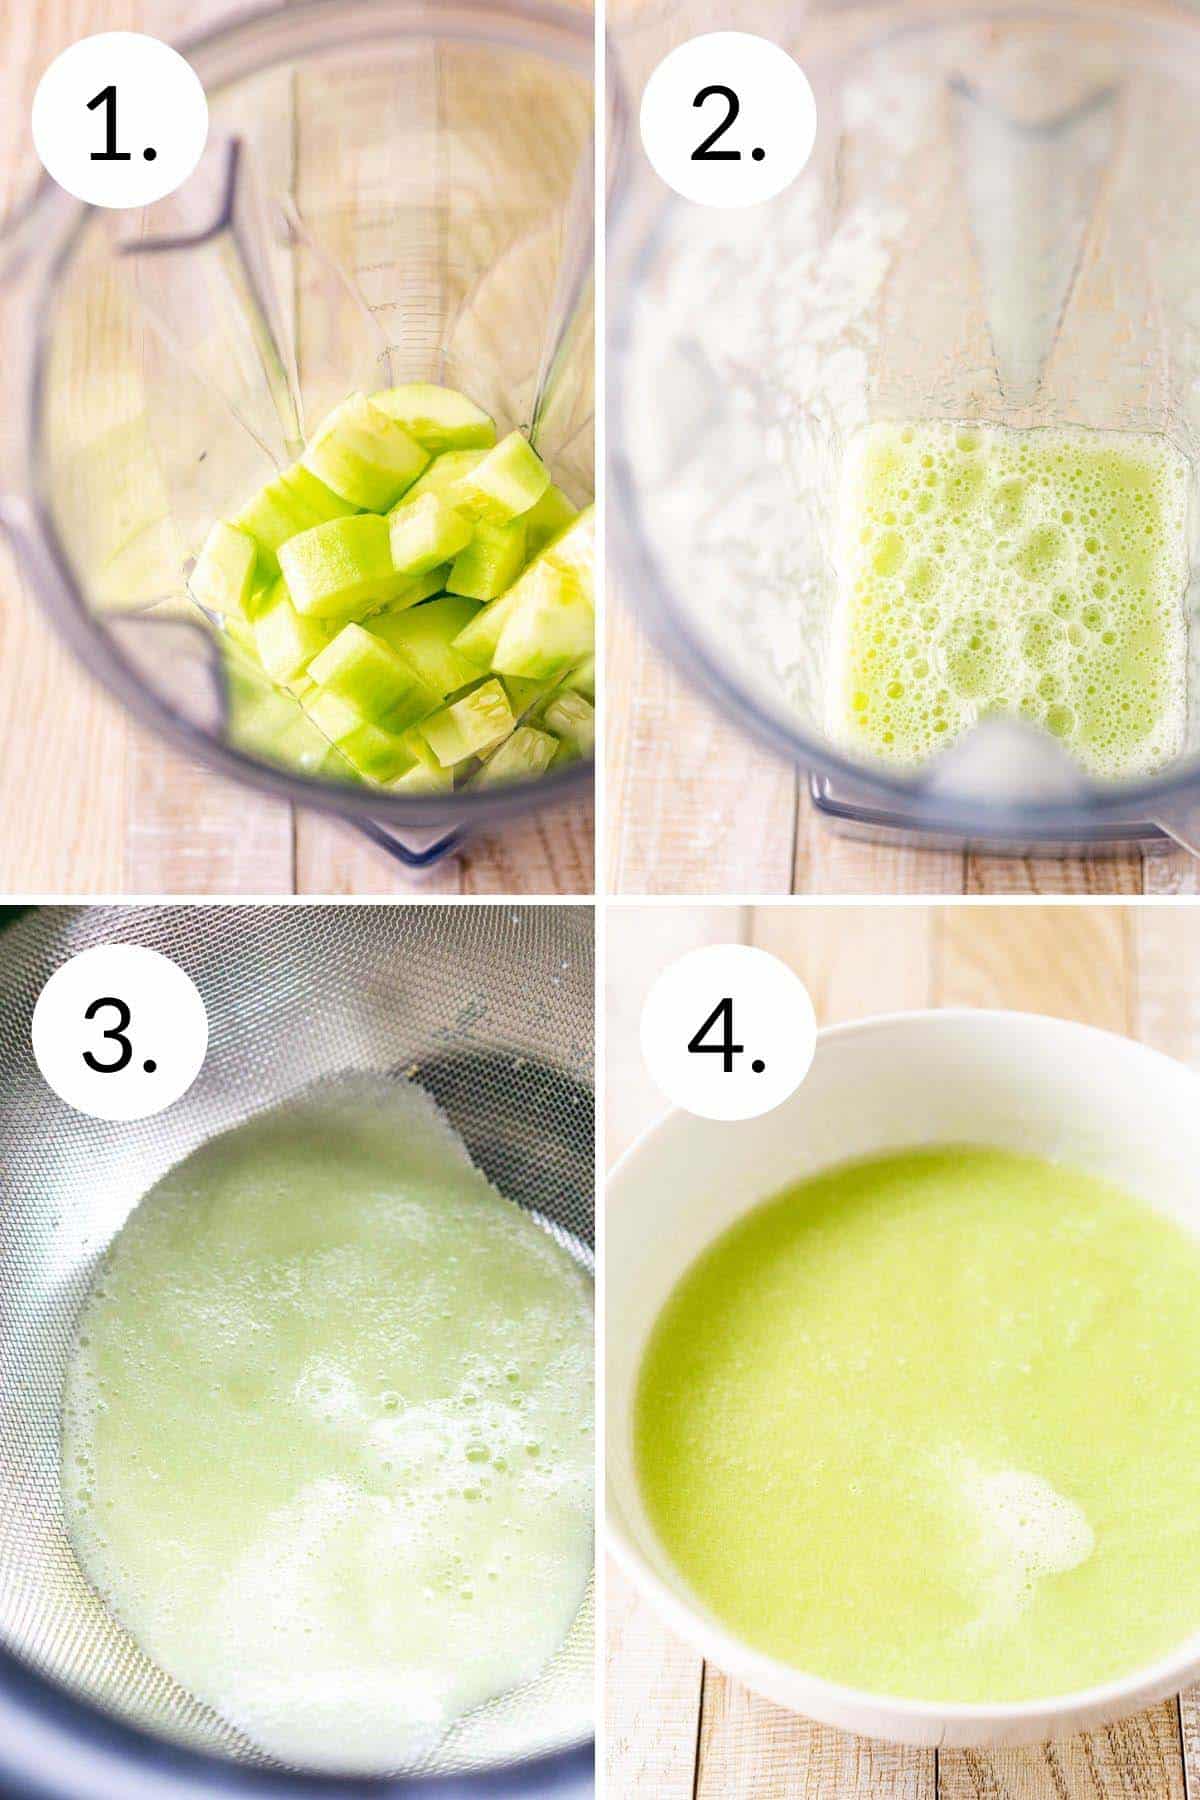 A collage showing the process of making the cucumber juice.